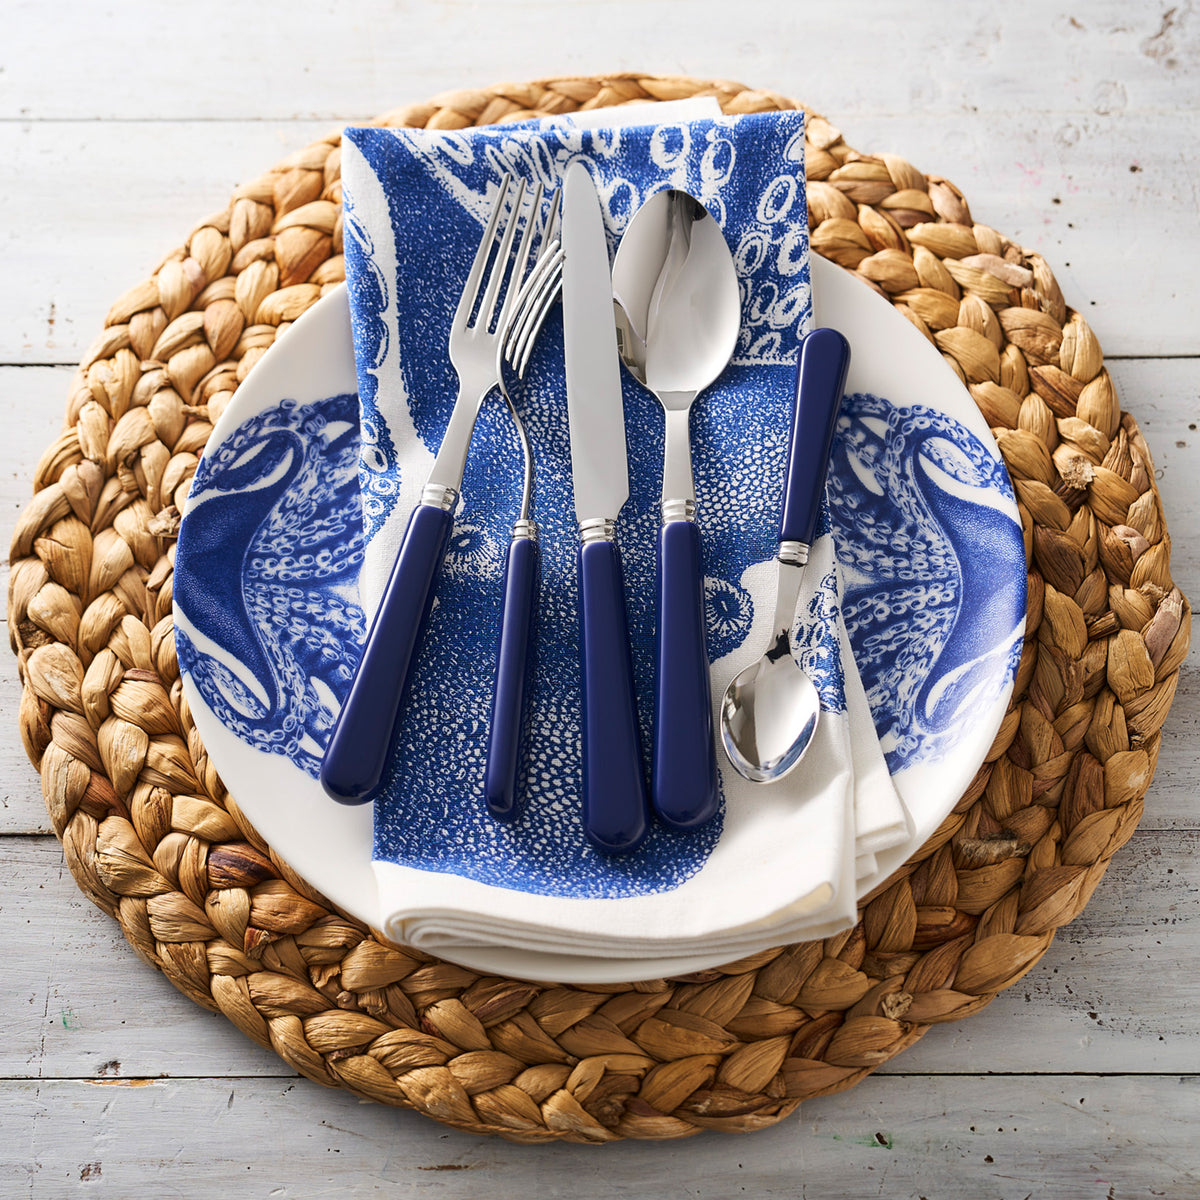 A blue octopus on white porcelain Lucy Coupe Dinner Plate by Caskata. Photo is styled with a rattan placemat, Lucy Dinner plate, Lucy Napkin and blue handled flatware set on a rustic whitewashed table.